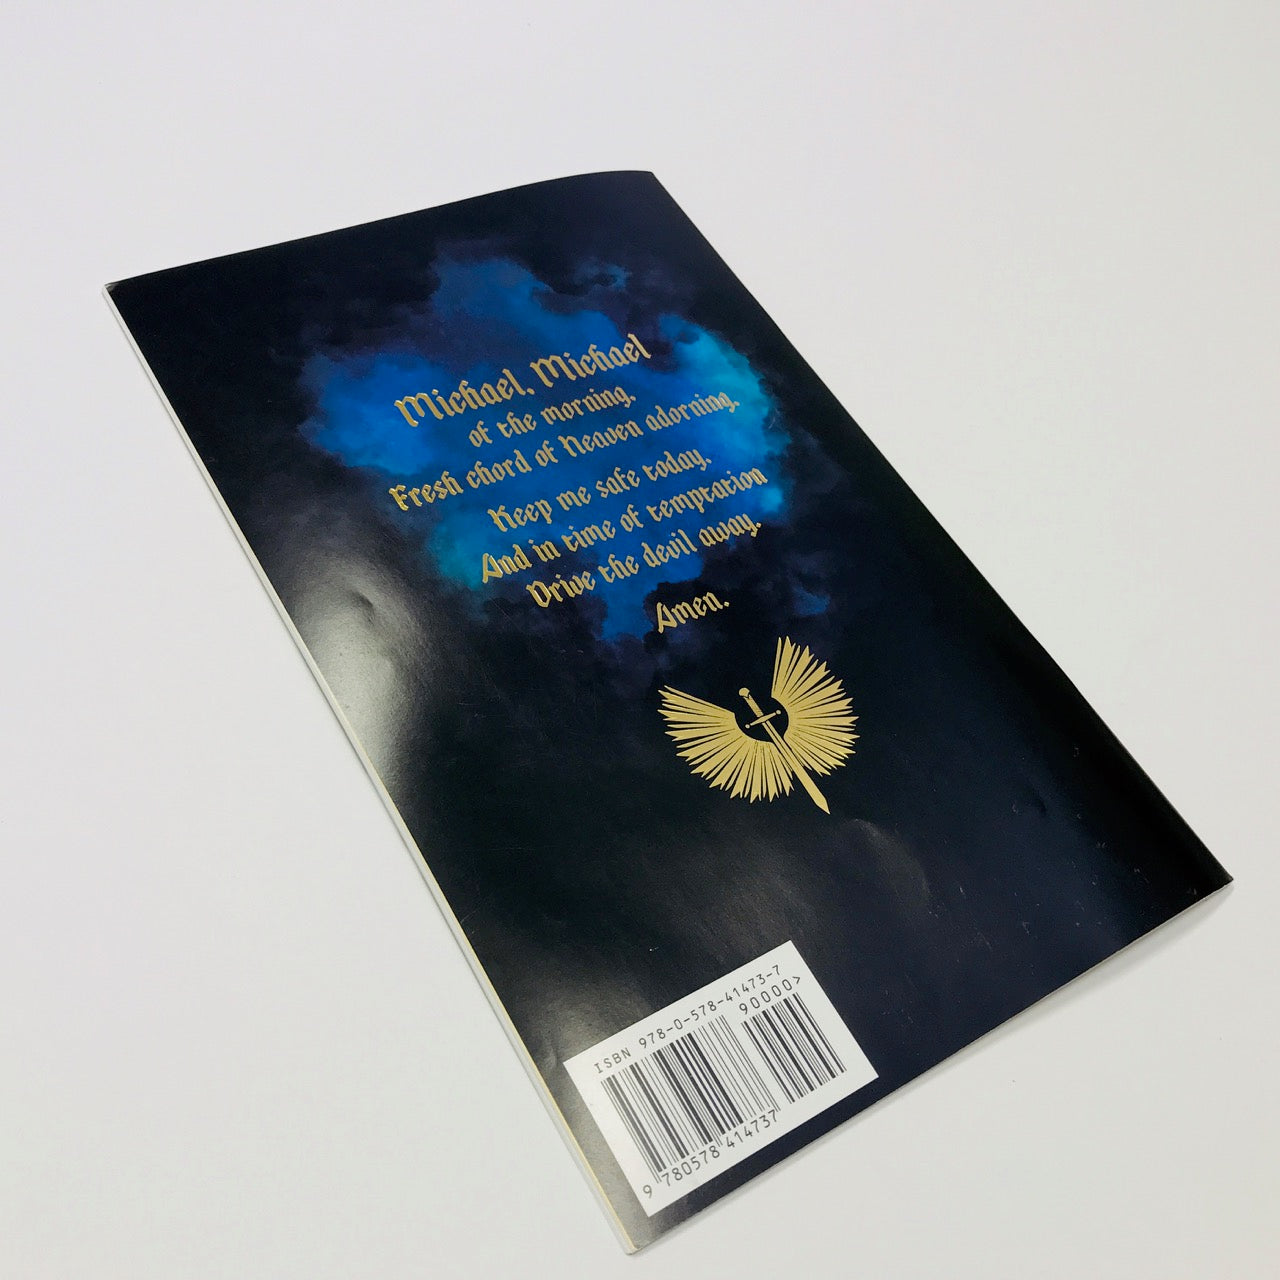 20 Pack of Saint Michael Above the 38th Parallel Comic Book (Gold Edition)